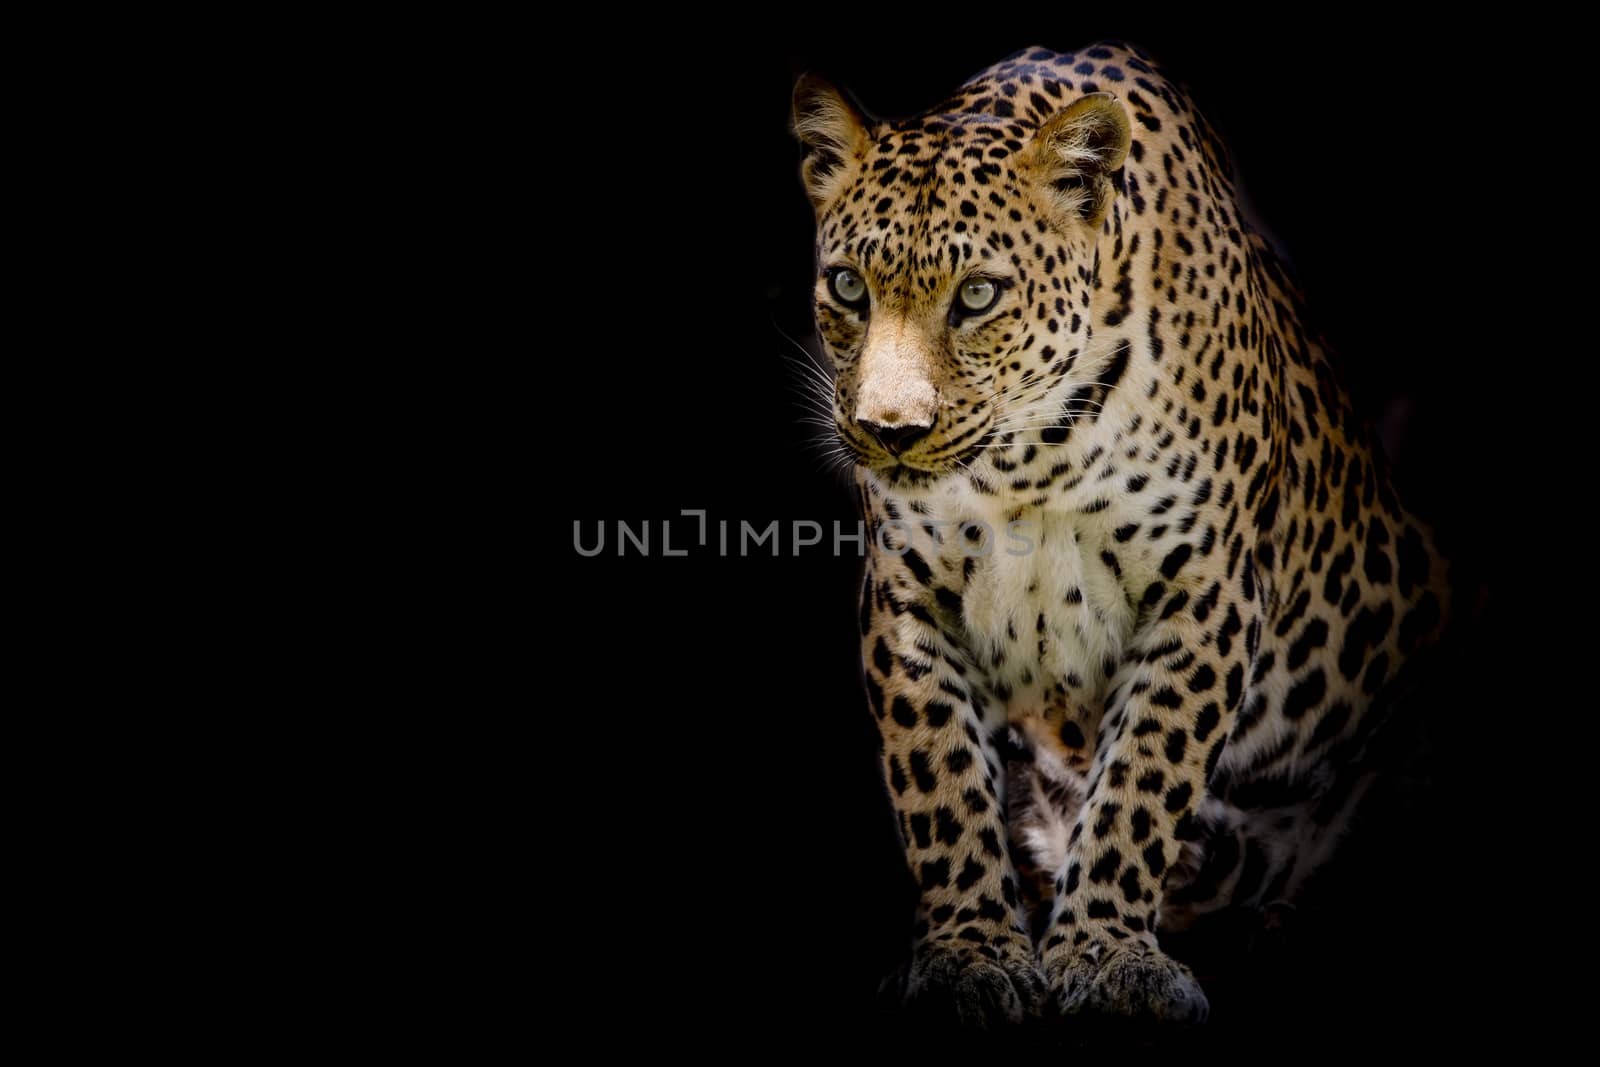 Leopard portrait isolate on black background by art9858